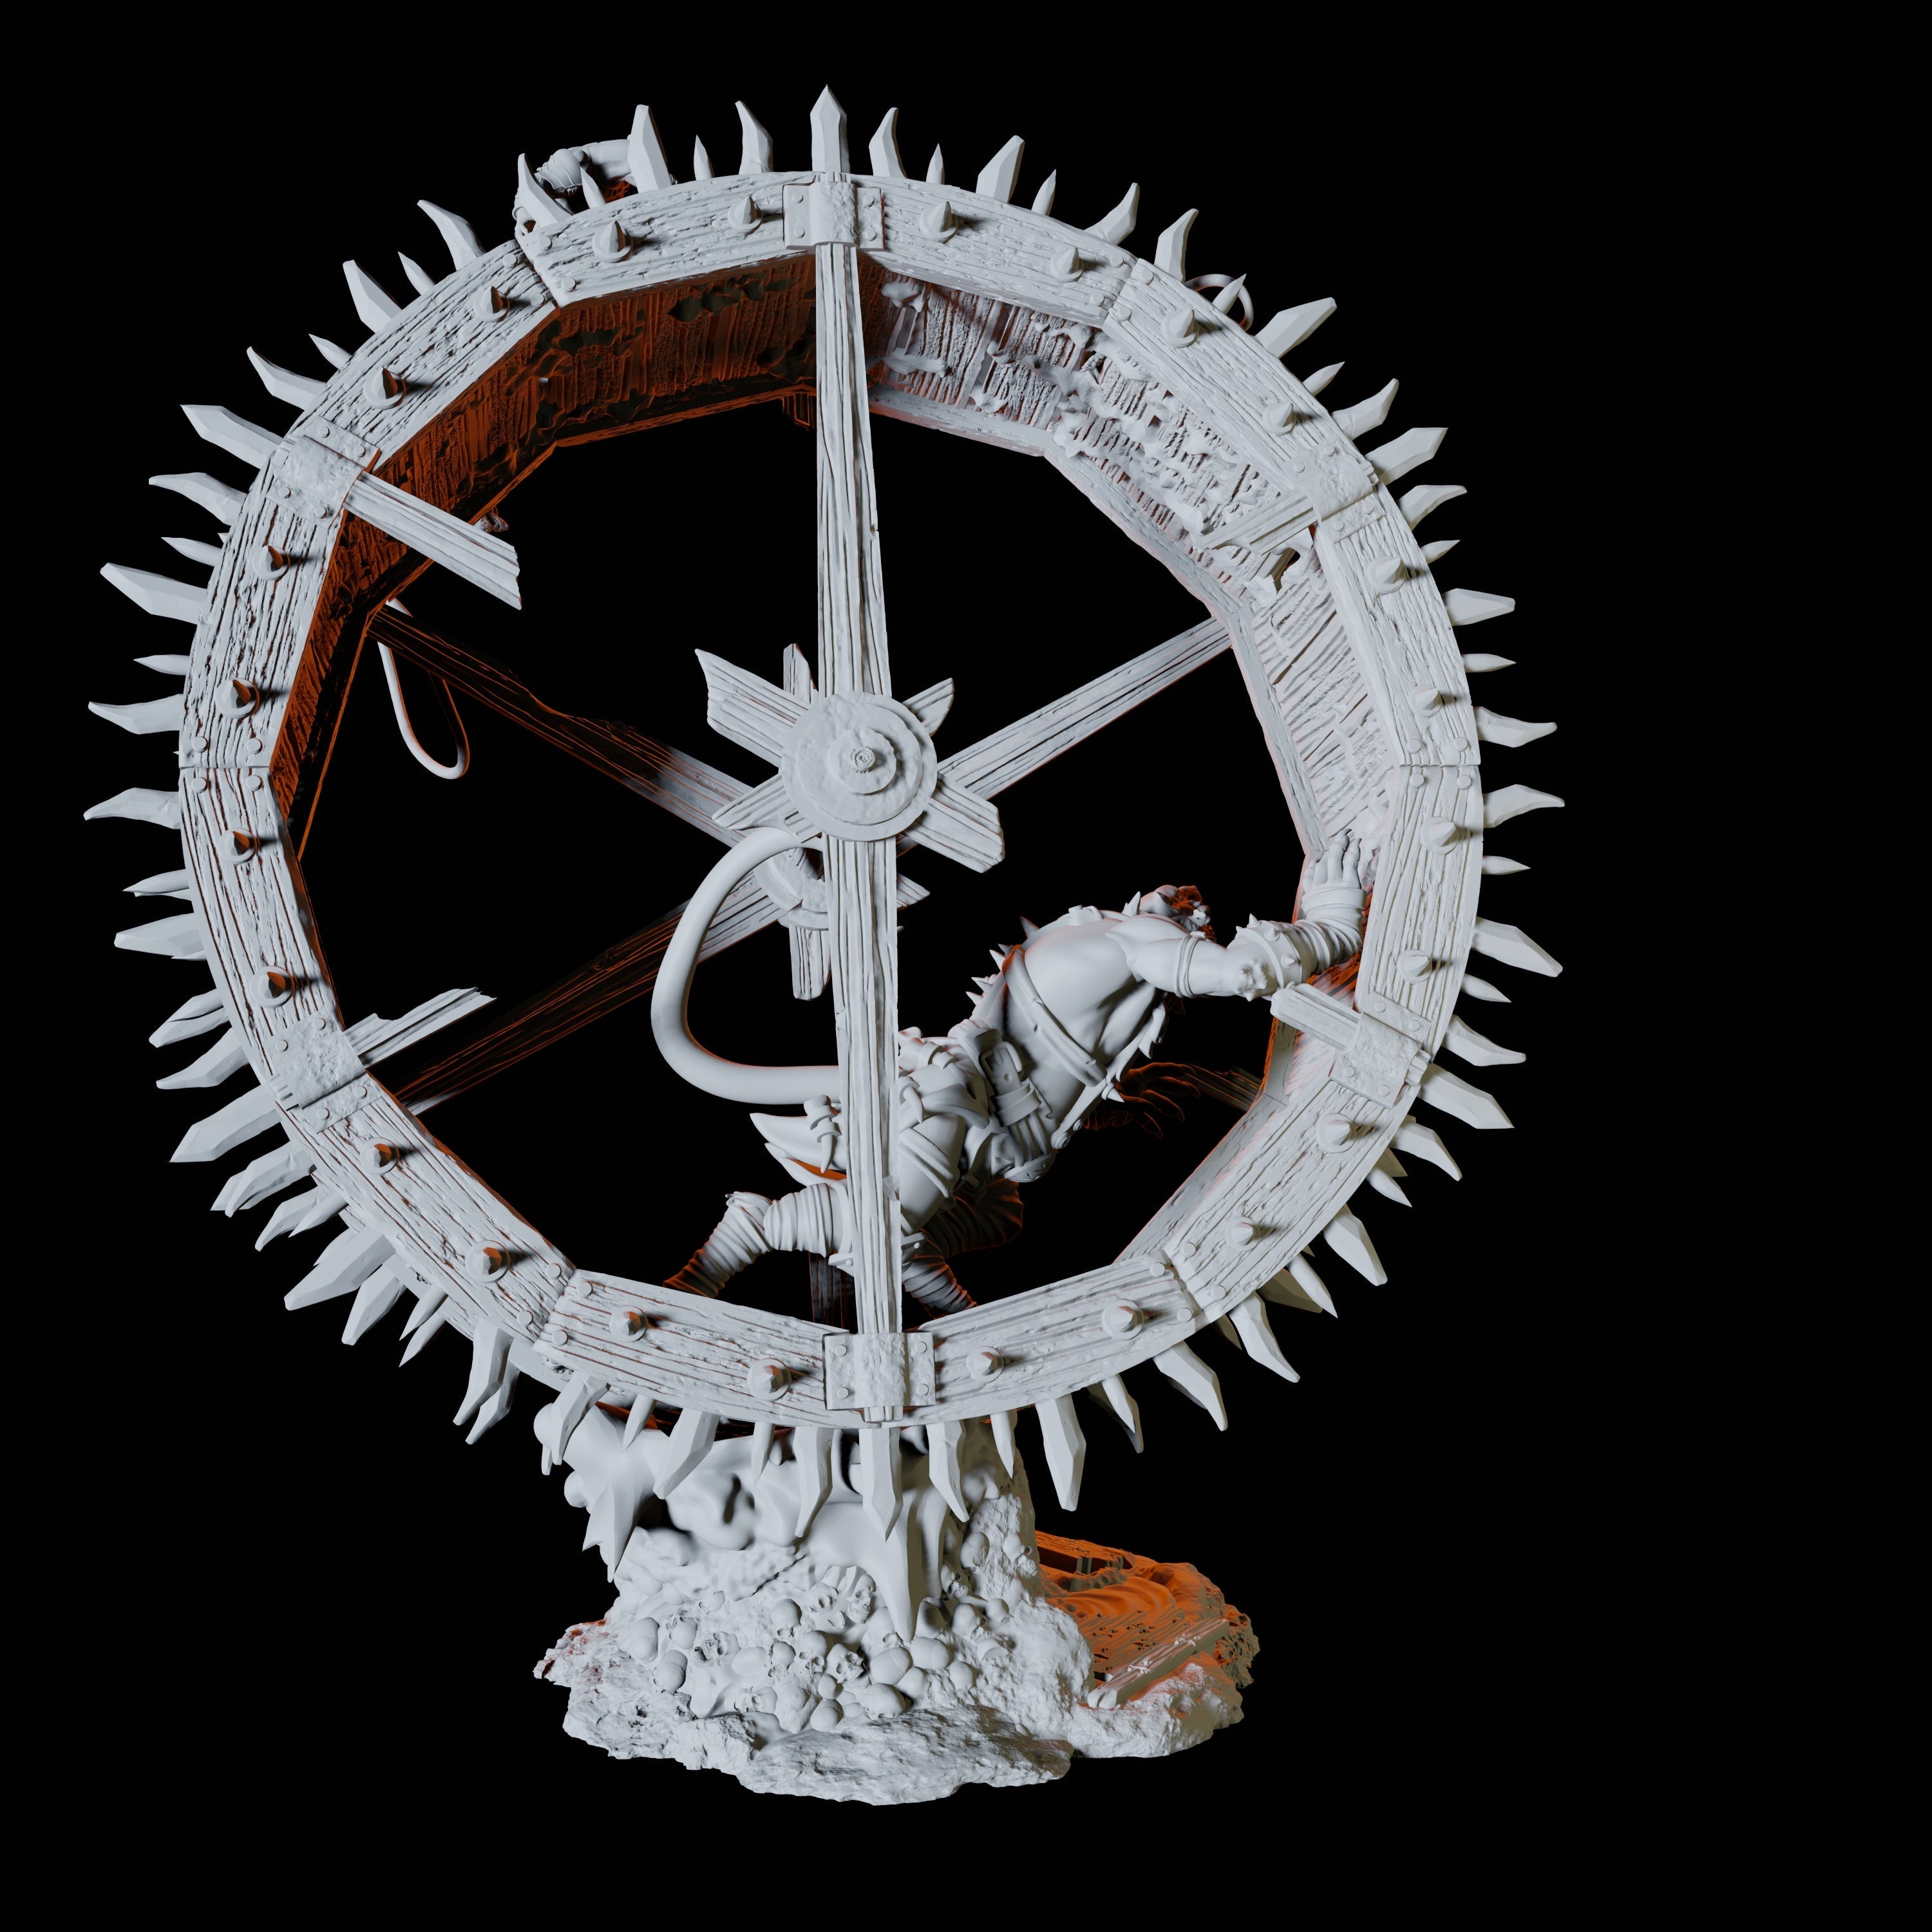 Ratfolk Siege Wheel Miniature for Dungeons and Dragons, Pathfinder or other TTRPGs